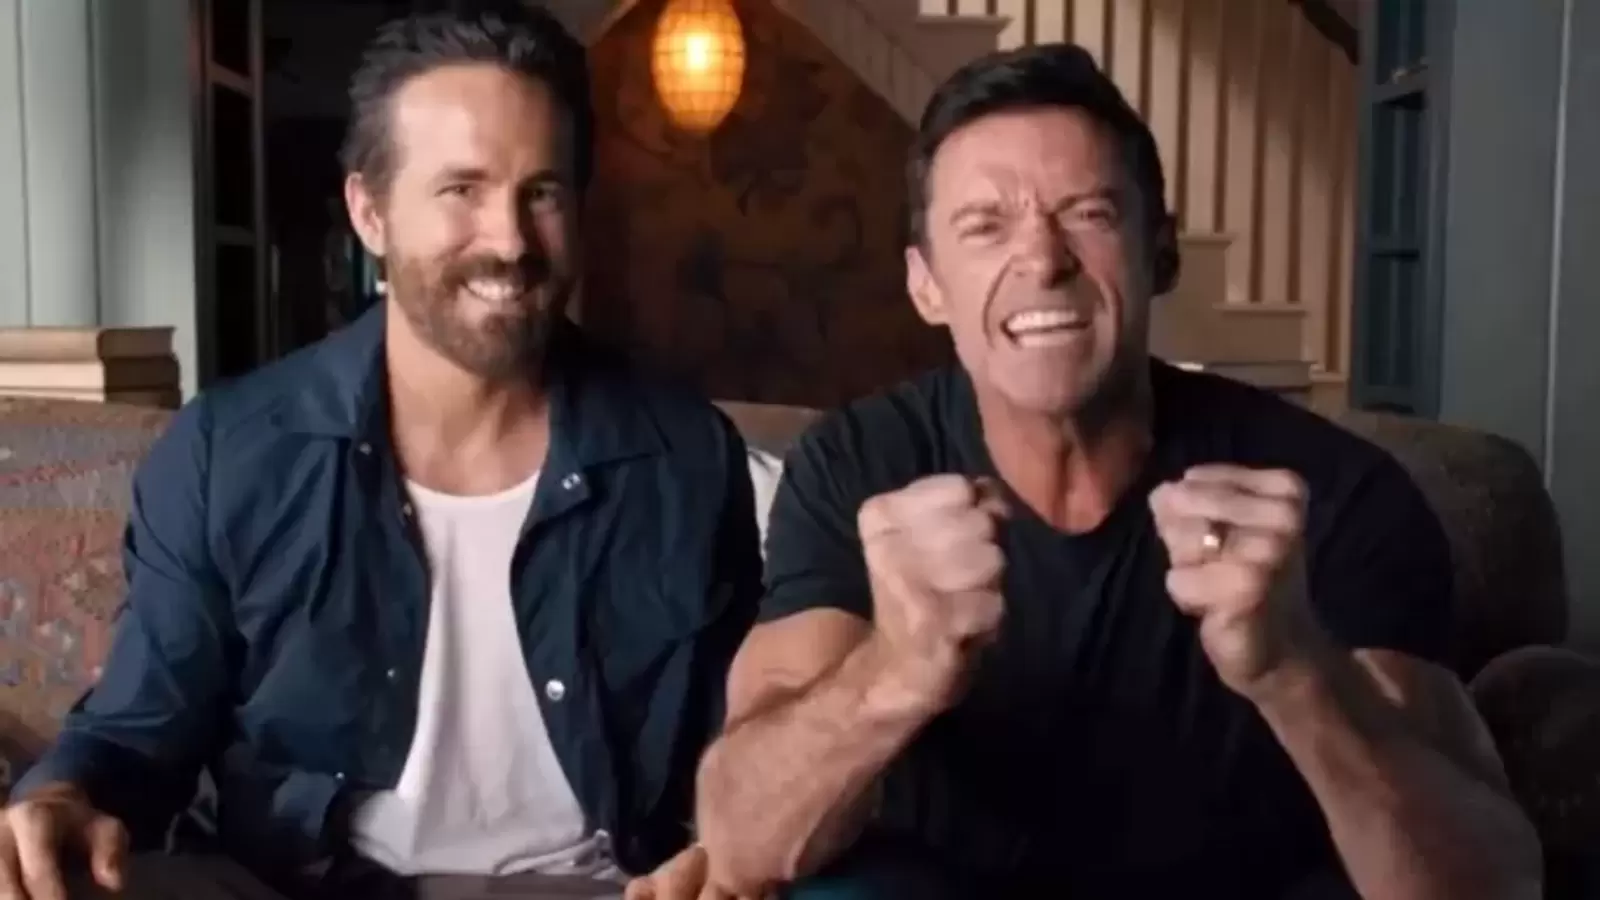 Hugh Jackman really doesn't want Ryan Reynolds to get an Oscar nomination